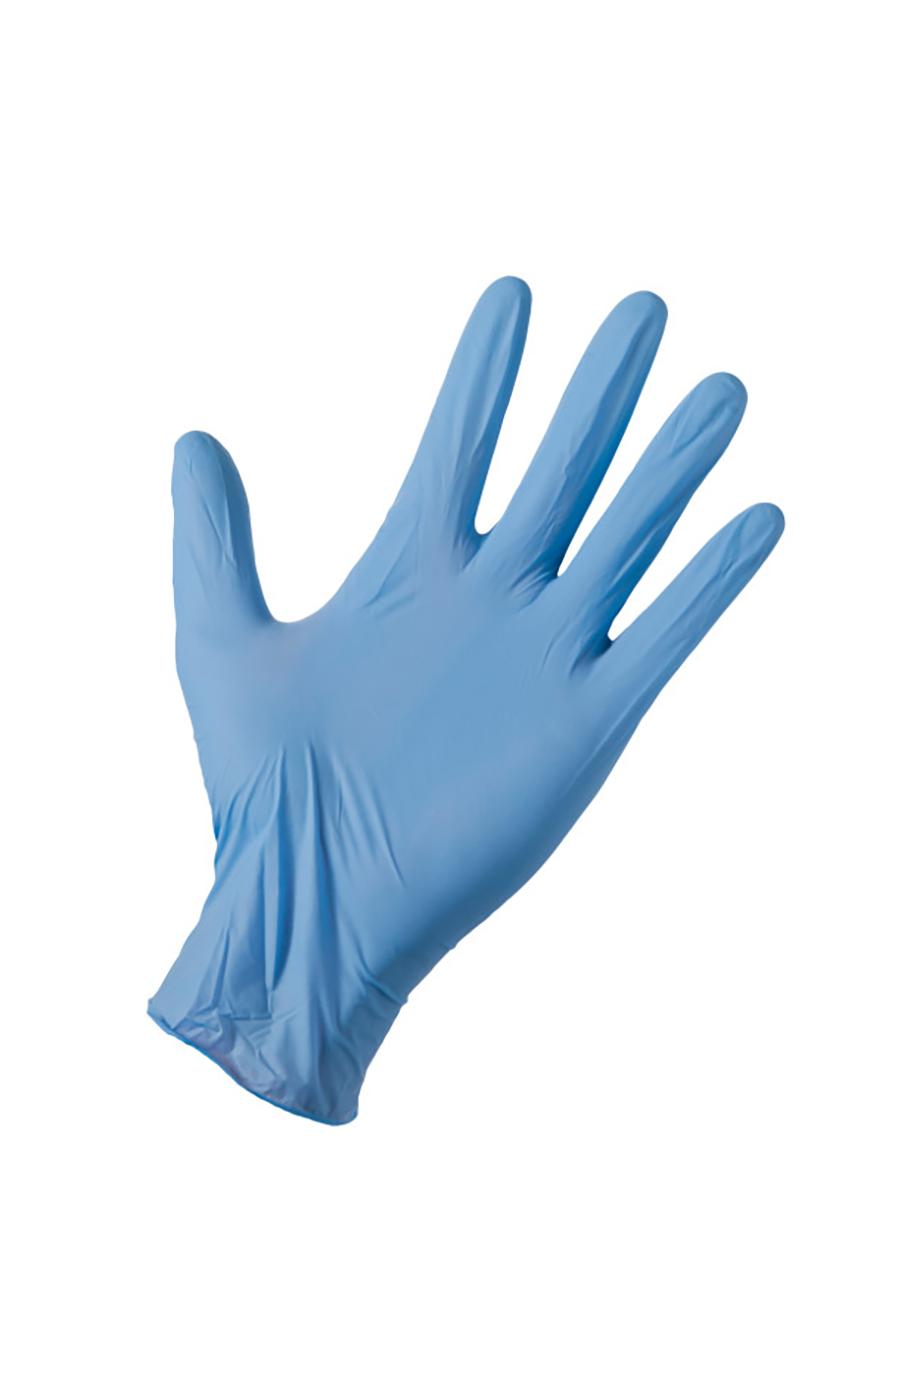 Soft Scrub Disposable Gloves Nitrile; image 2 of 2